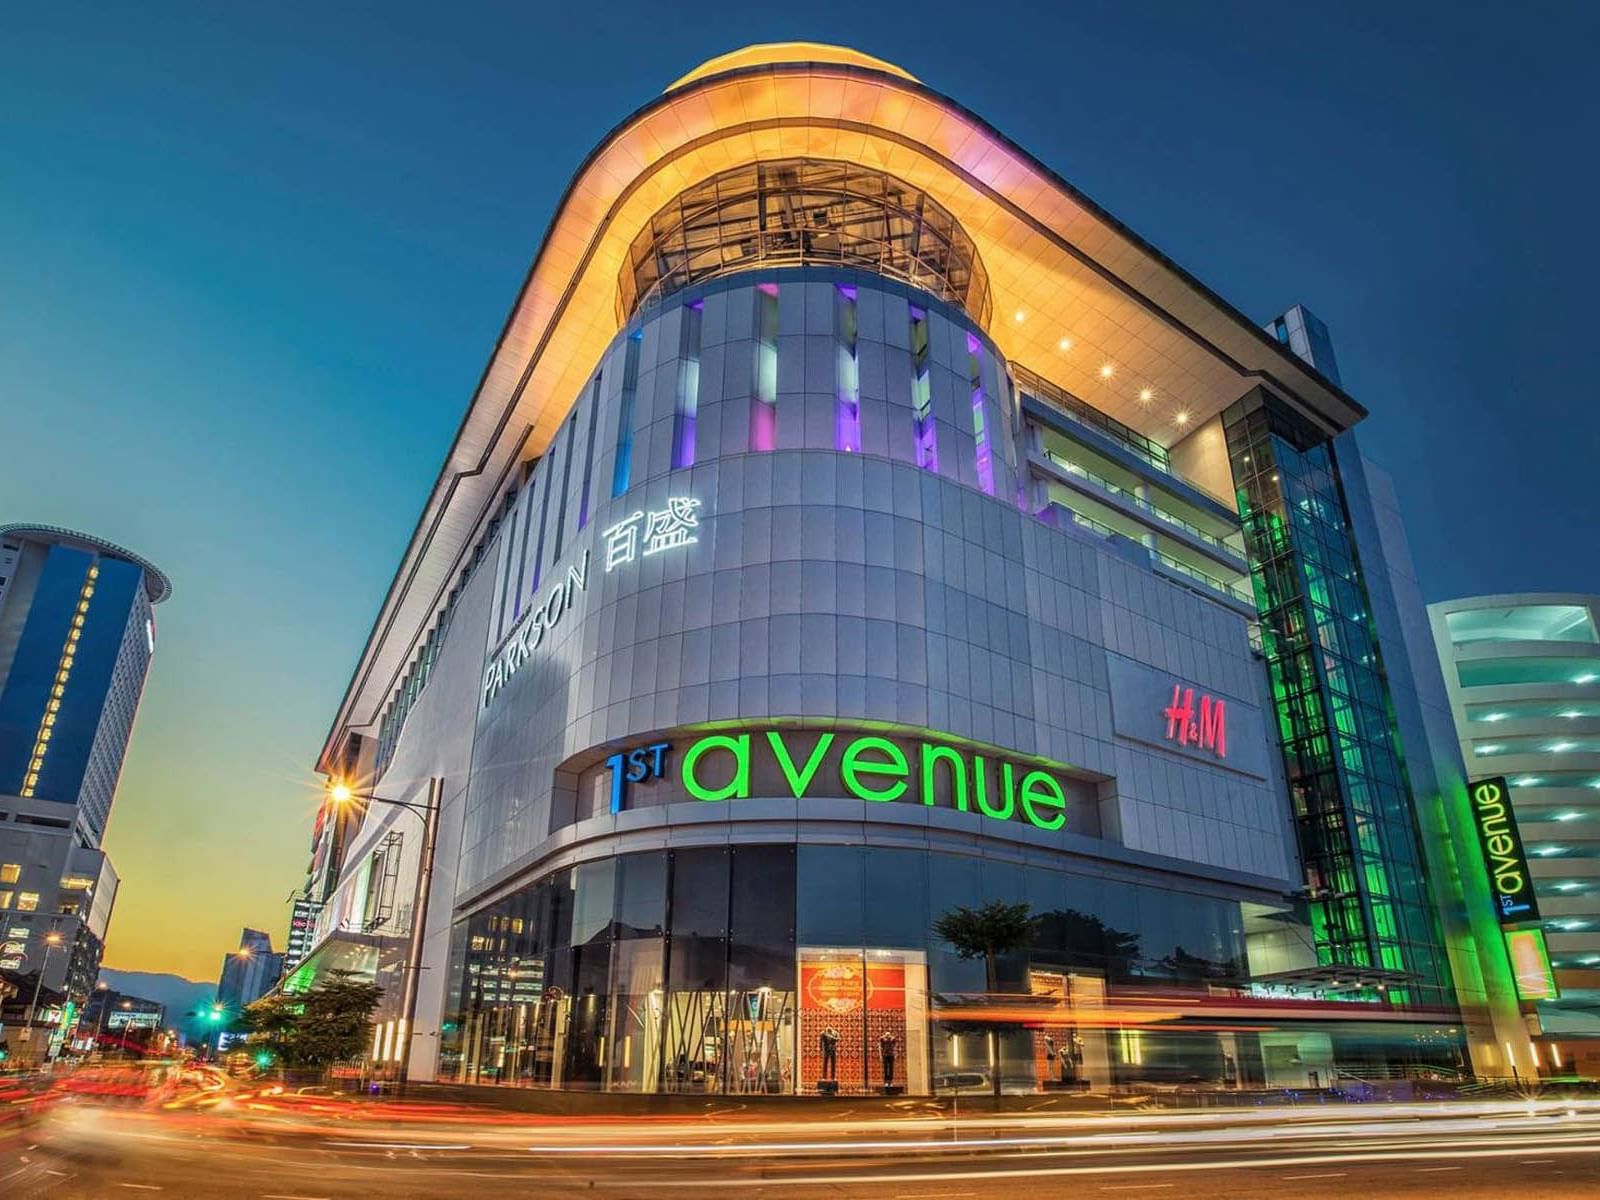 The exterior of 1st Avenue Mall near St. Giles Wembley Hotel  